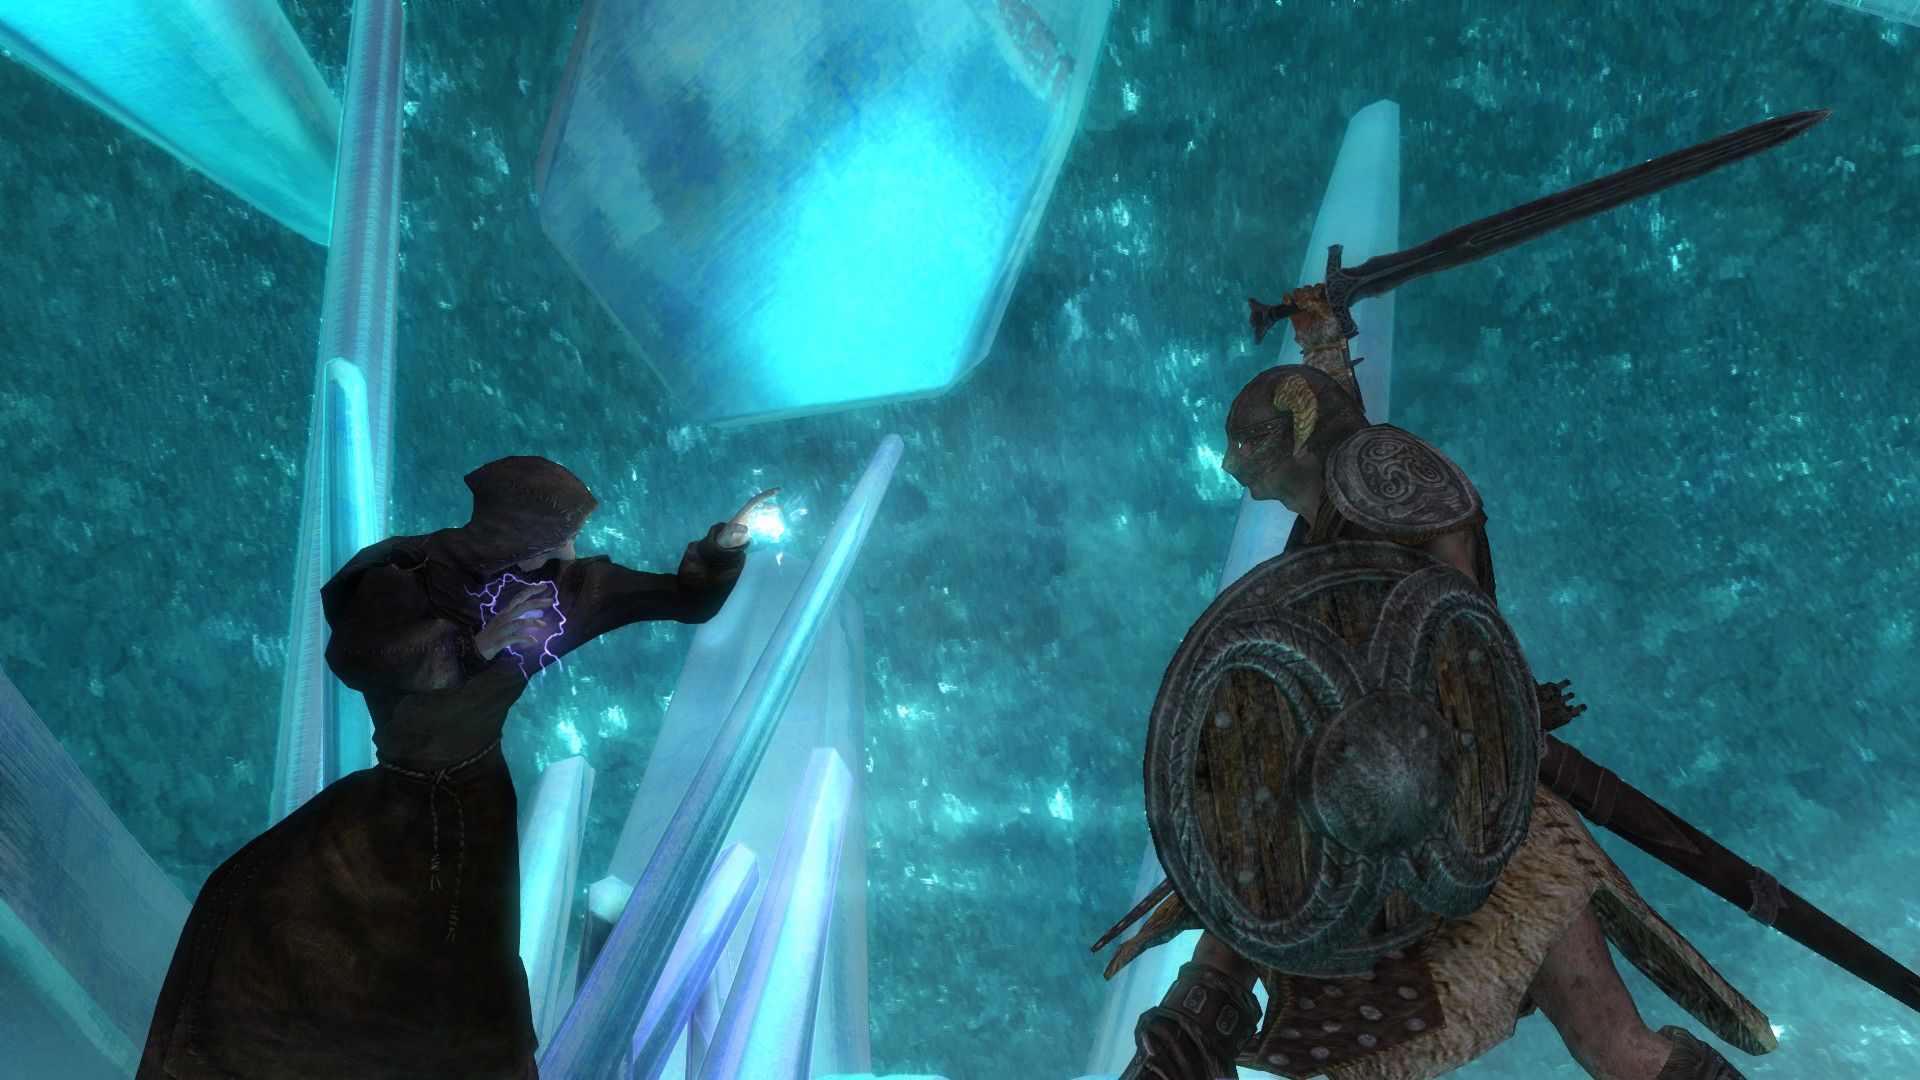 A fighter swings at a mage inside a space comprised entirely of glimmering blue crystals.